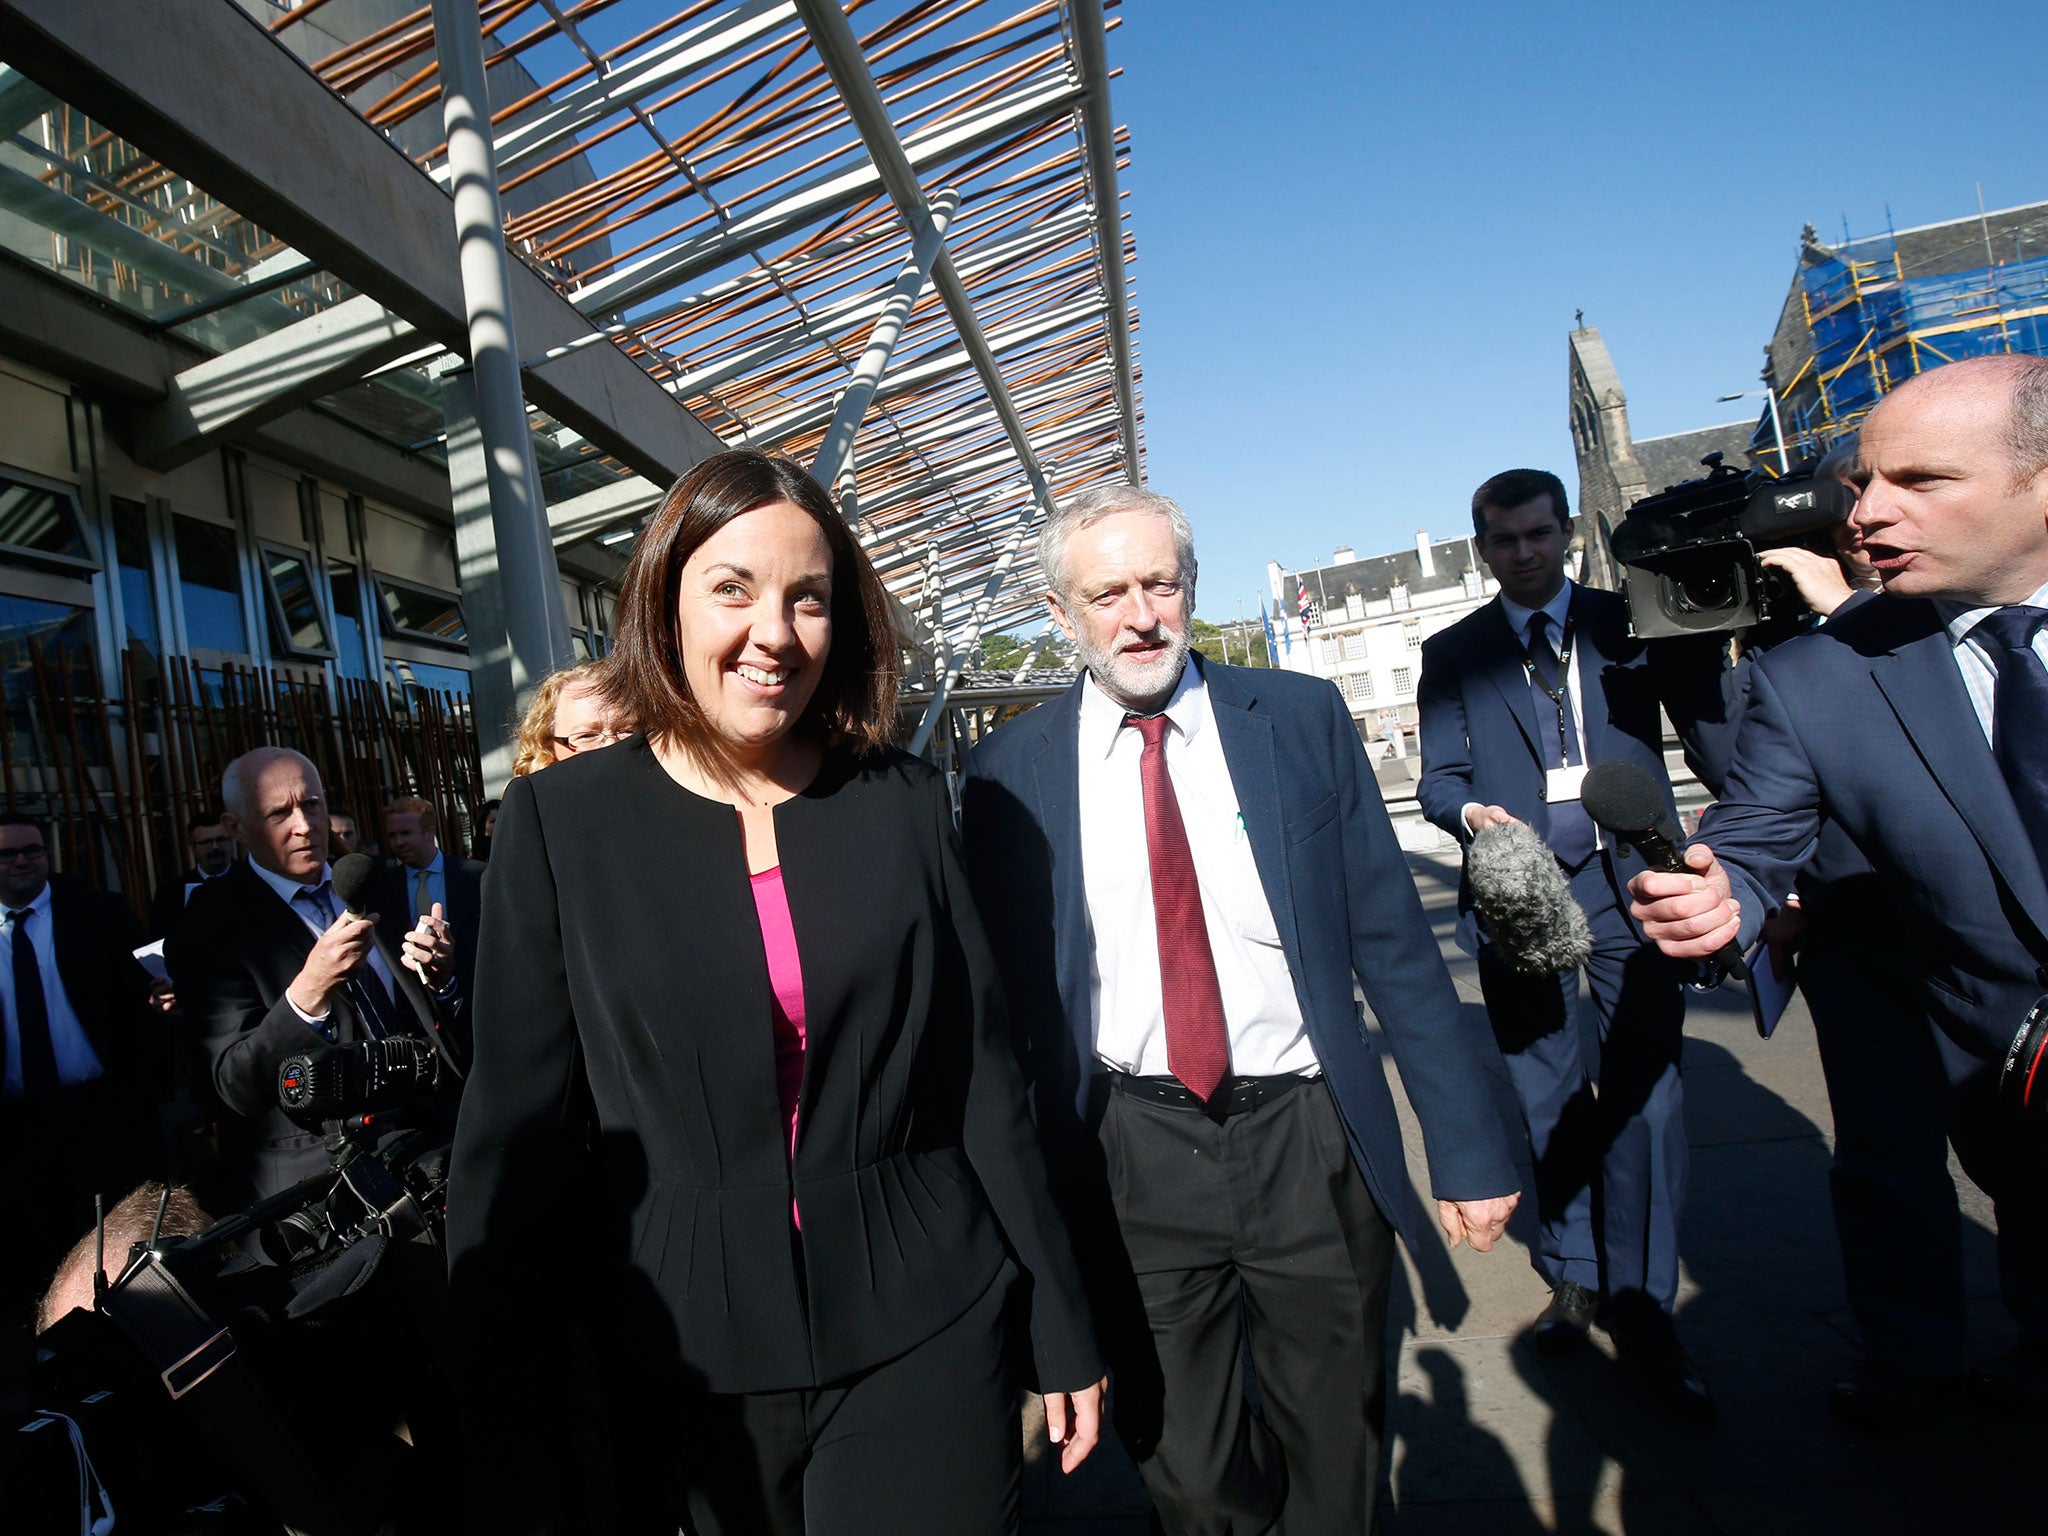 Jeremy Corbyn and Kezia Dugdale arriving at the Scottish Parliament building